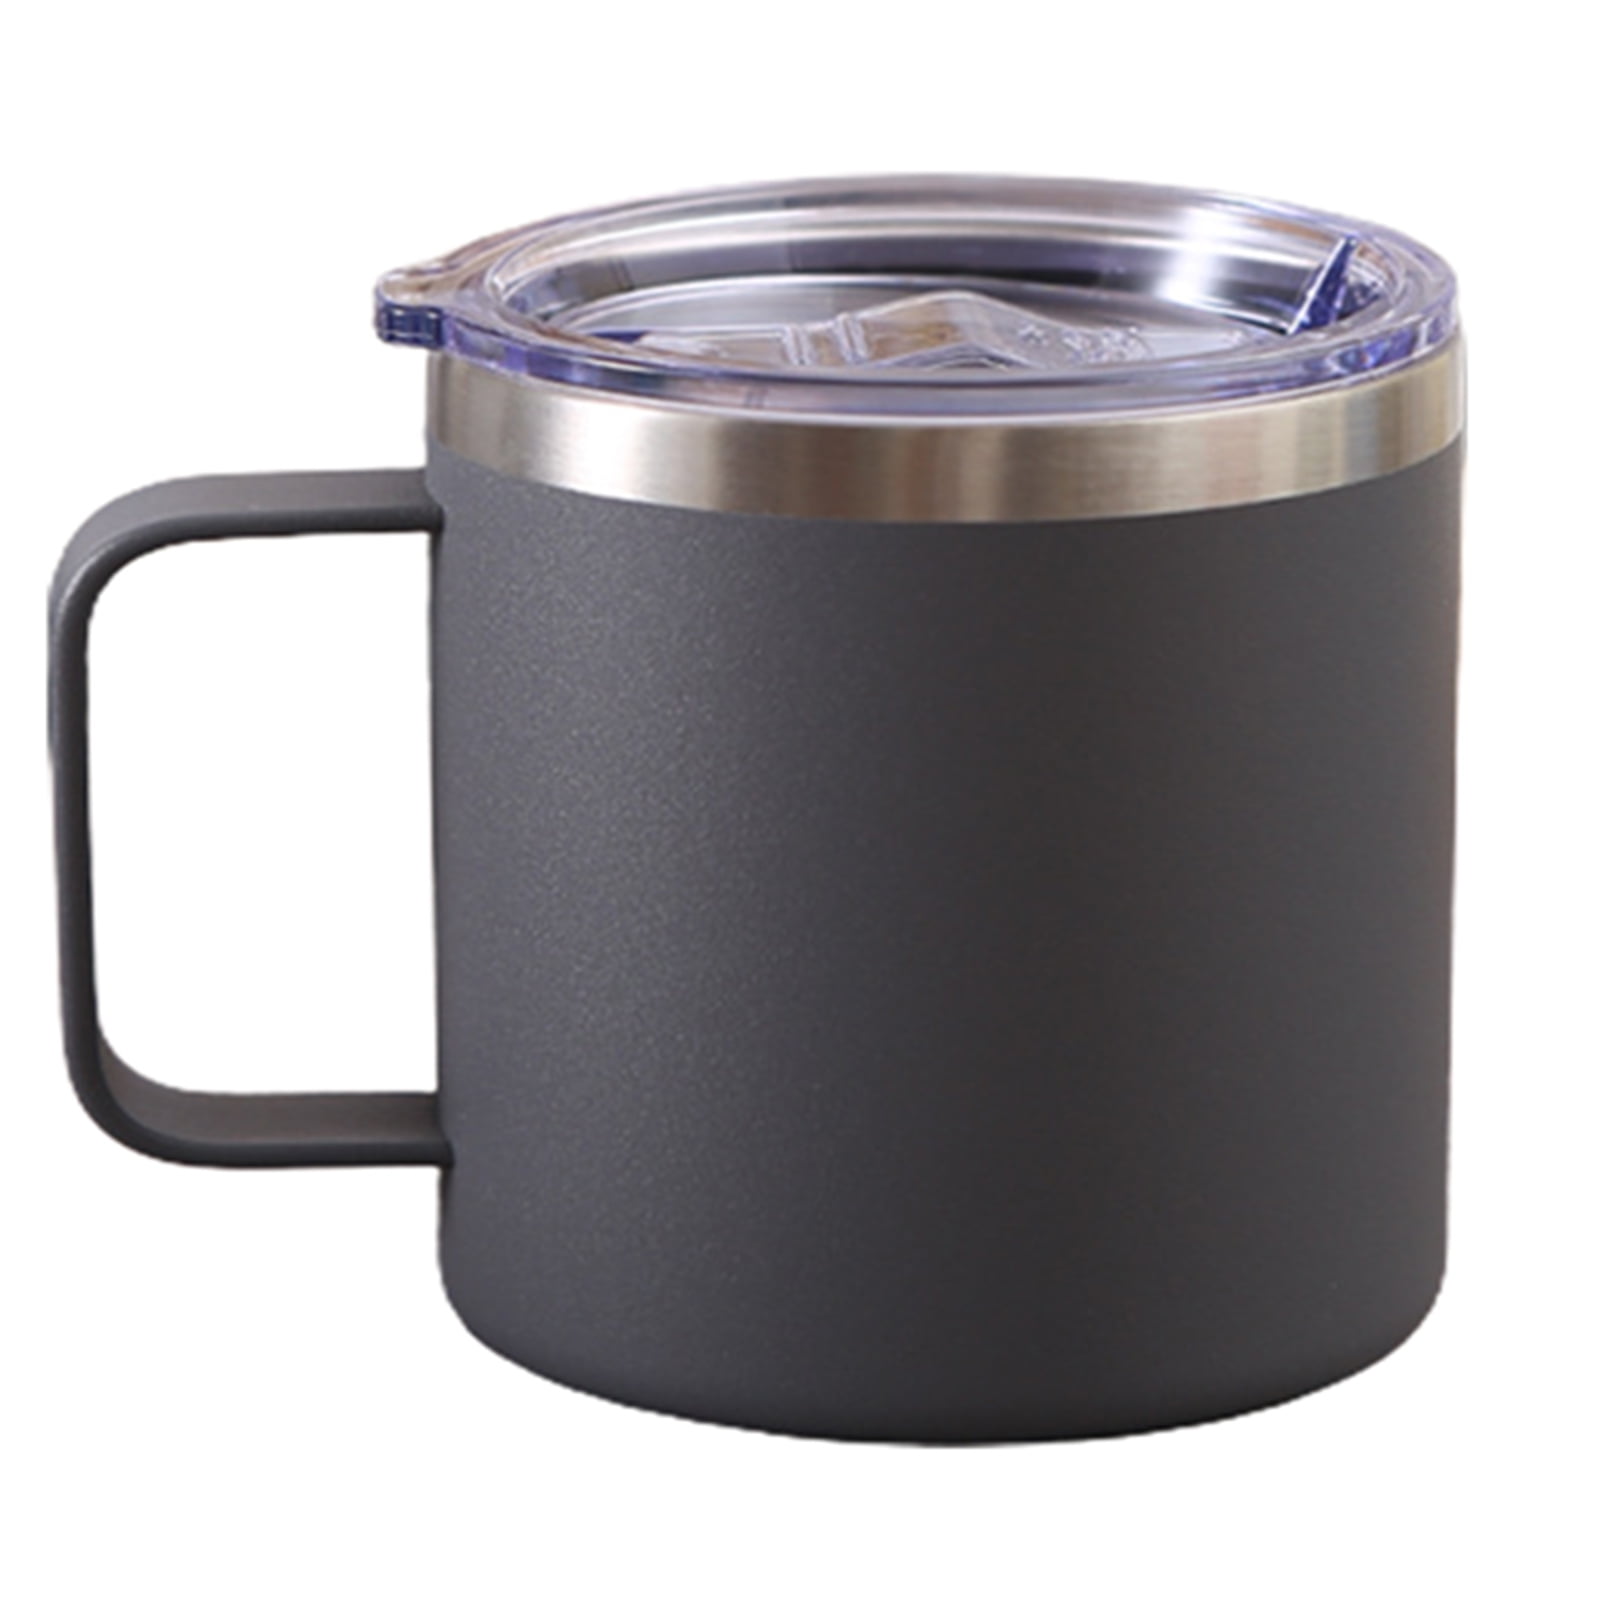 Heimden Coffee Tumbler Sleeve insulated coffee mug - Double wall Stainless  steel fits most starbucks…See more Heimden Coffee Tumbler Sleeve insulated